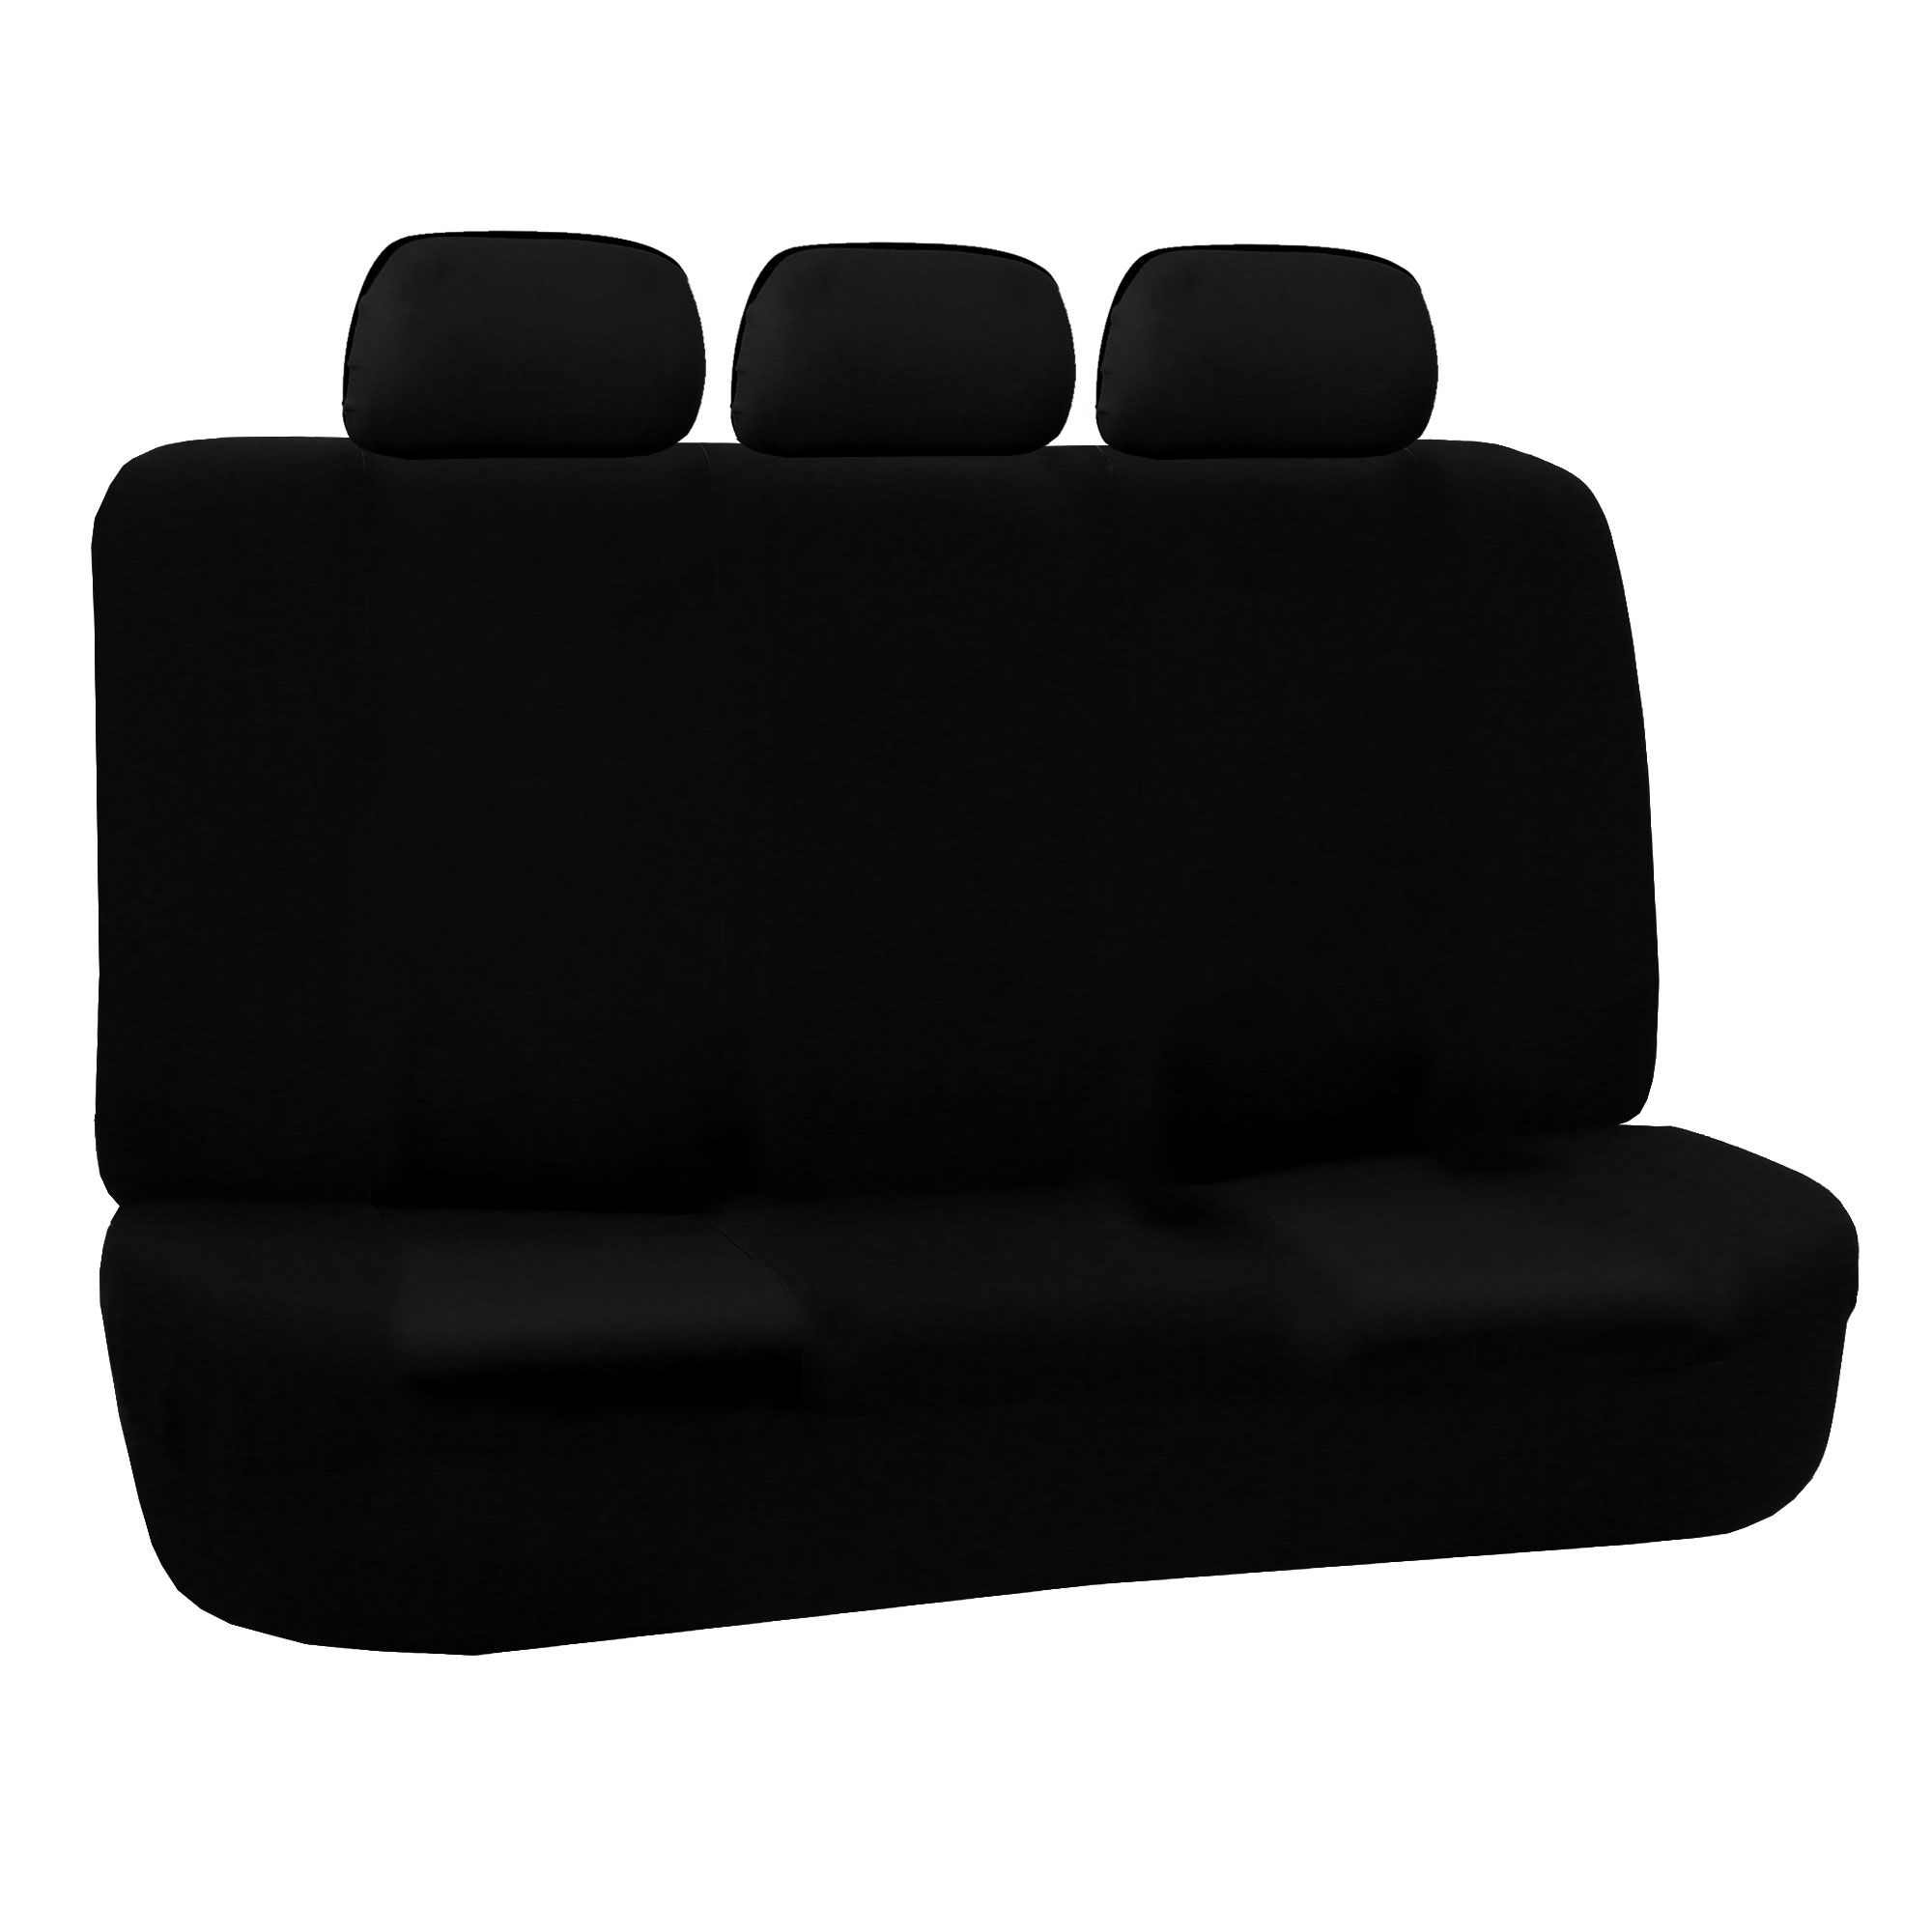 FH Group Universal Flat Cloth Fabric Car Seat Cover, 5 Headrests Full Set, Black - image 2 of 2